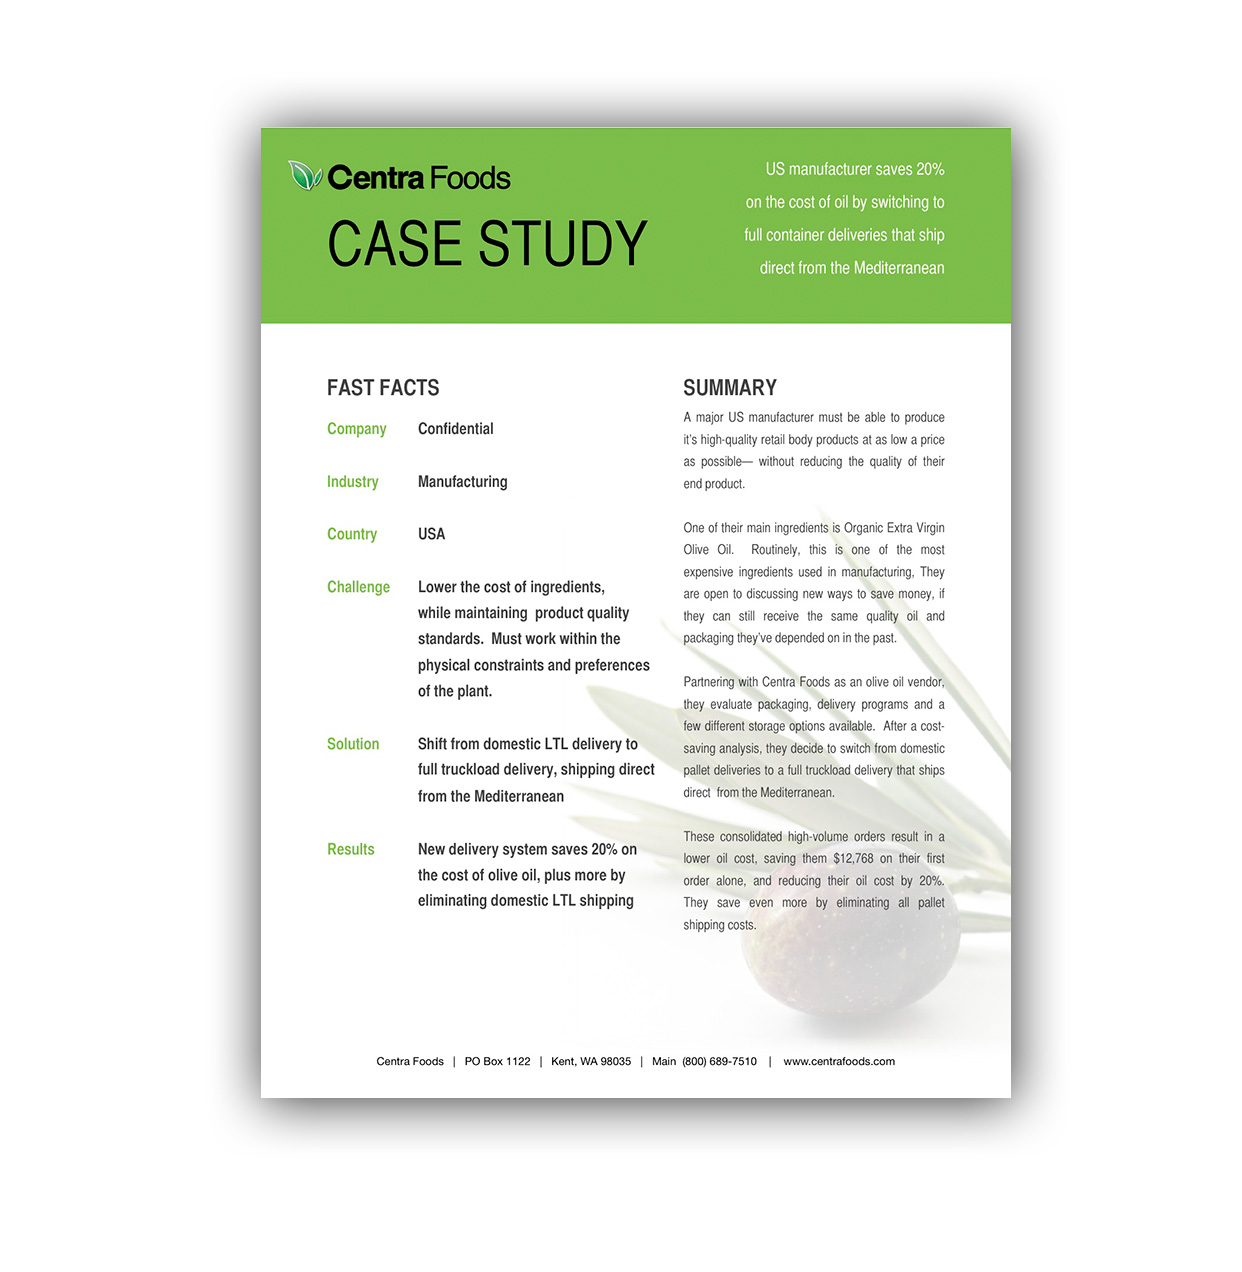 Download Case Study: Full Containers vs. Pallet Deliveries